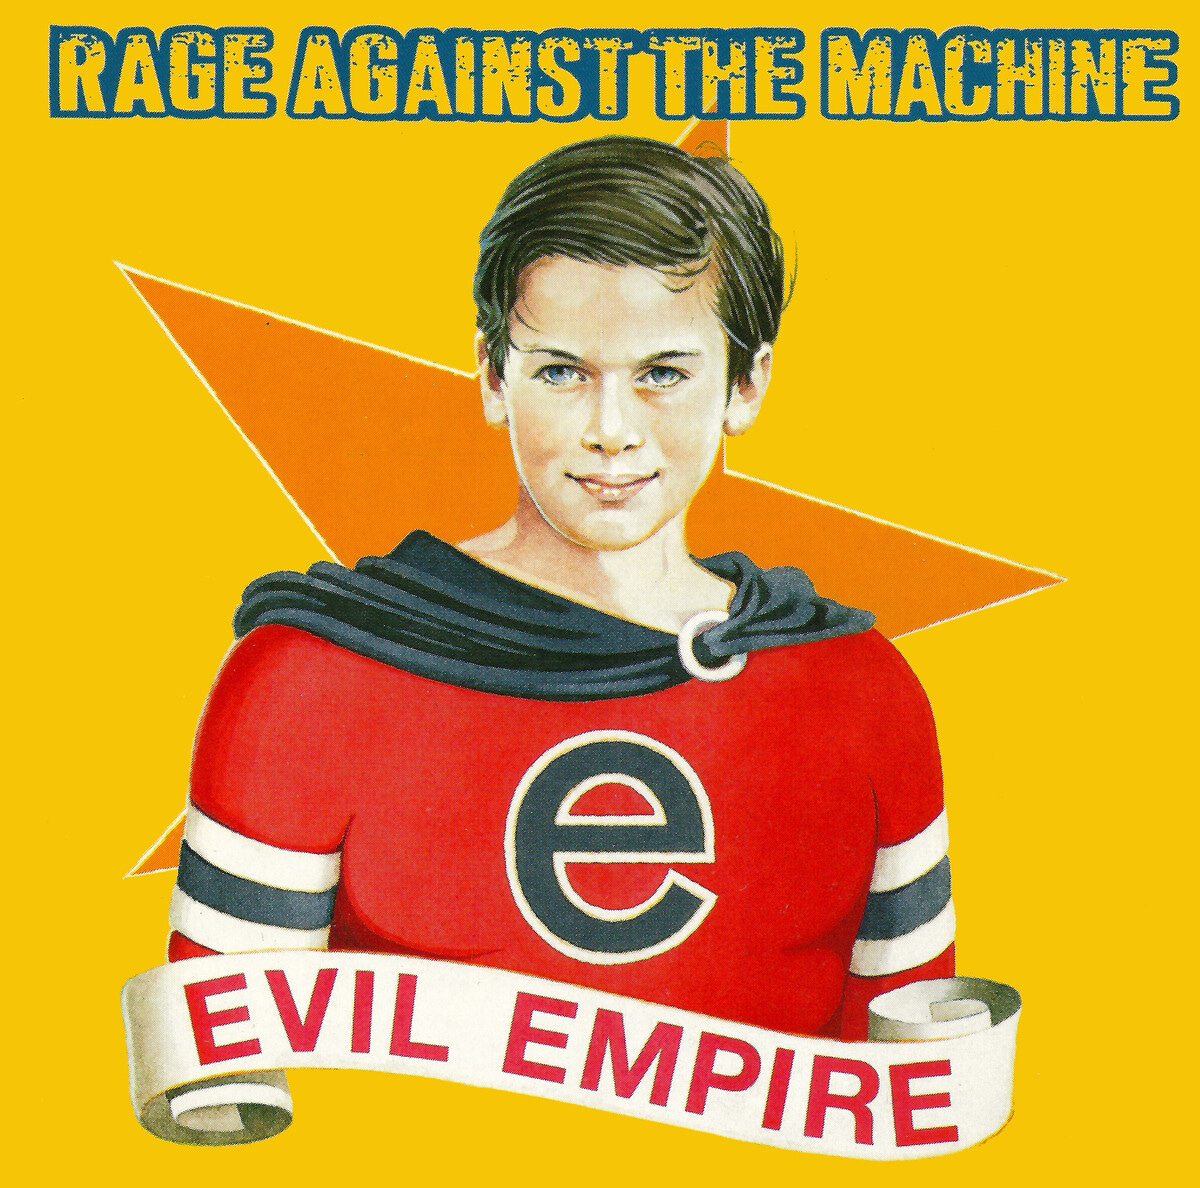 Evil Empire by Rage Against the Machine (Album; Epic; 481026 2): Reviews,  Ratings, Credits, Song list - Rate Your Music